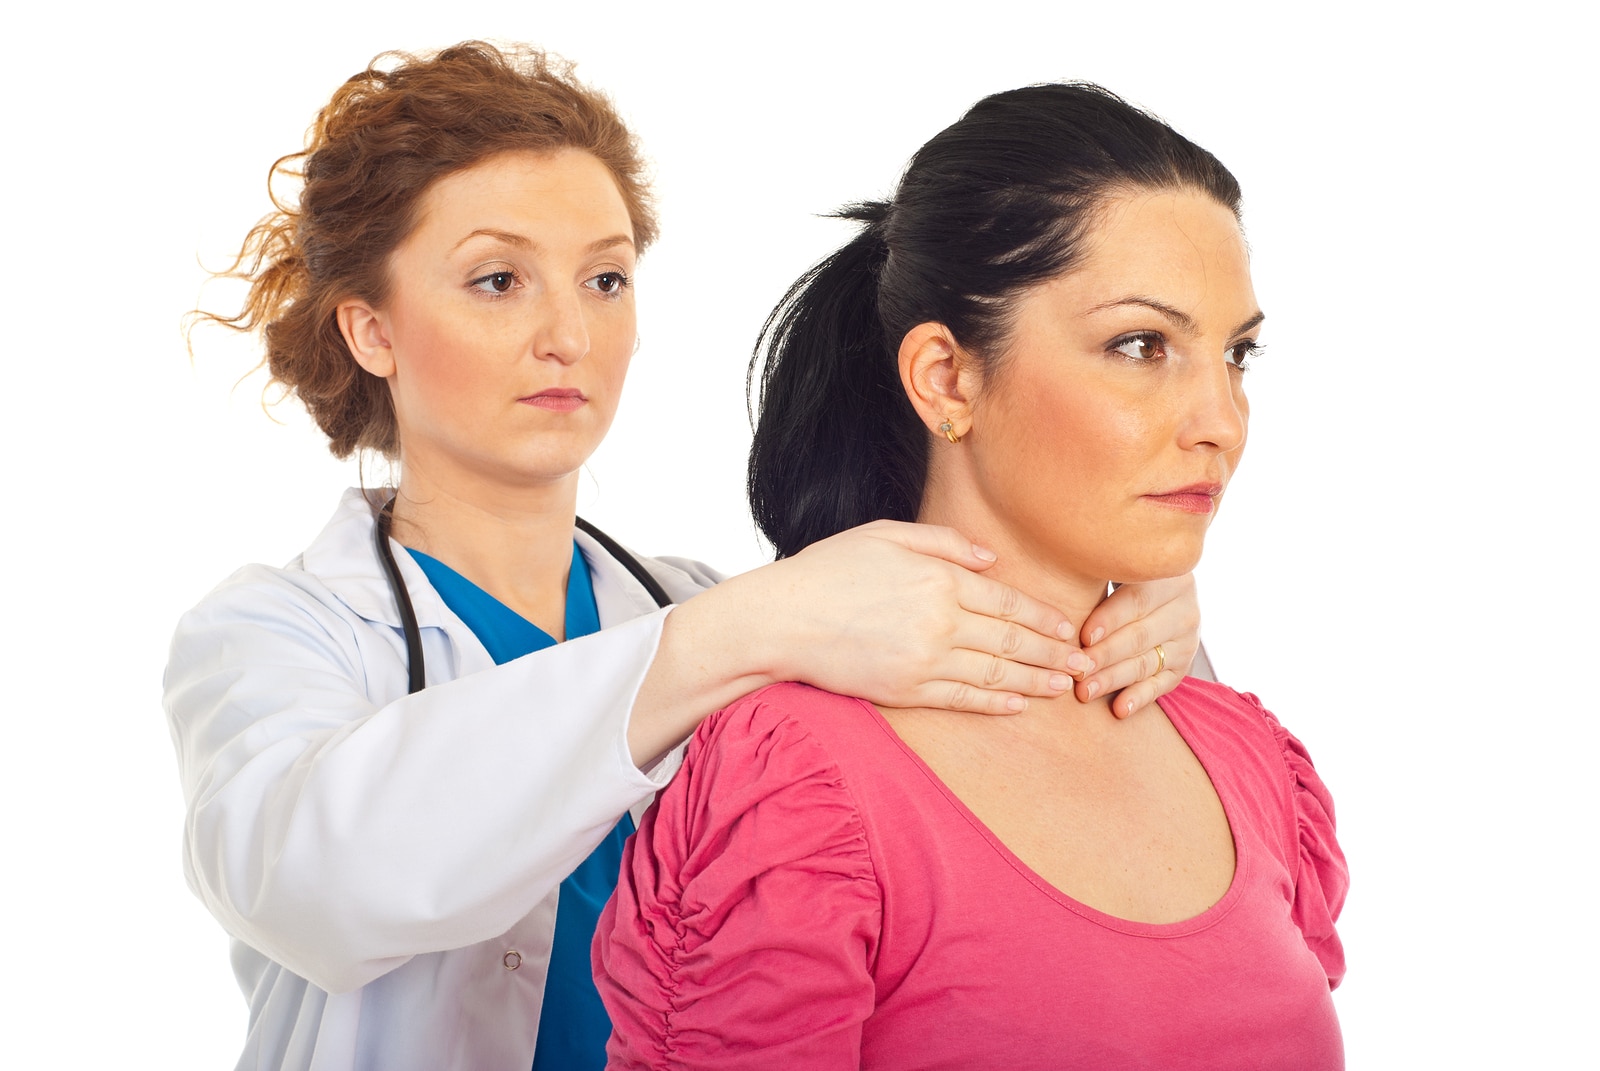 Causes of Hypothyroidism - Signs and Symptoms